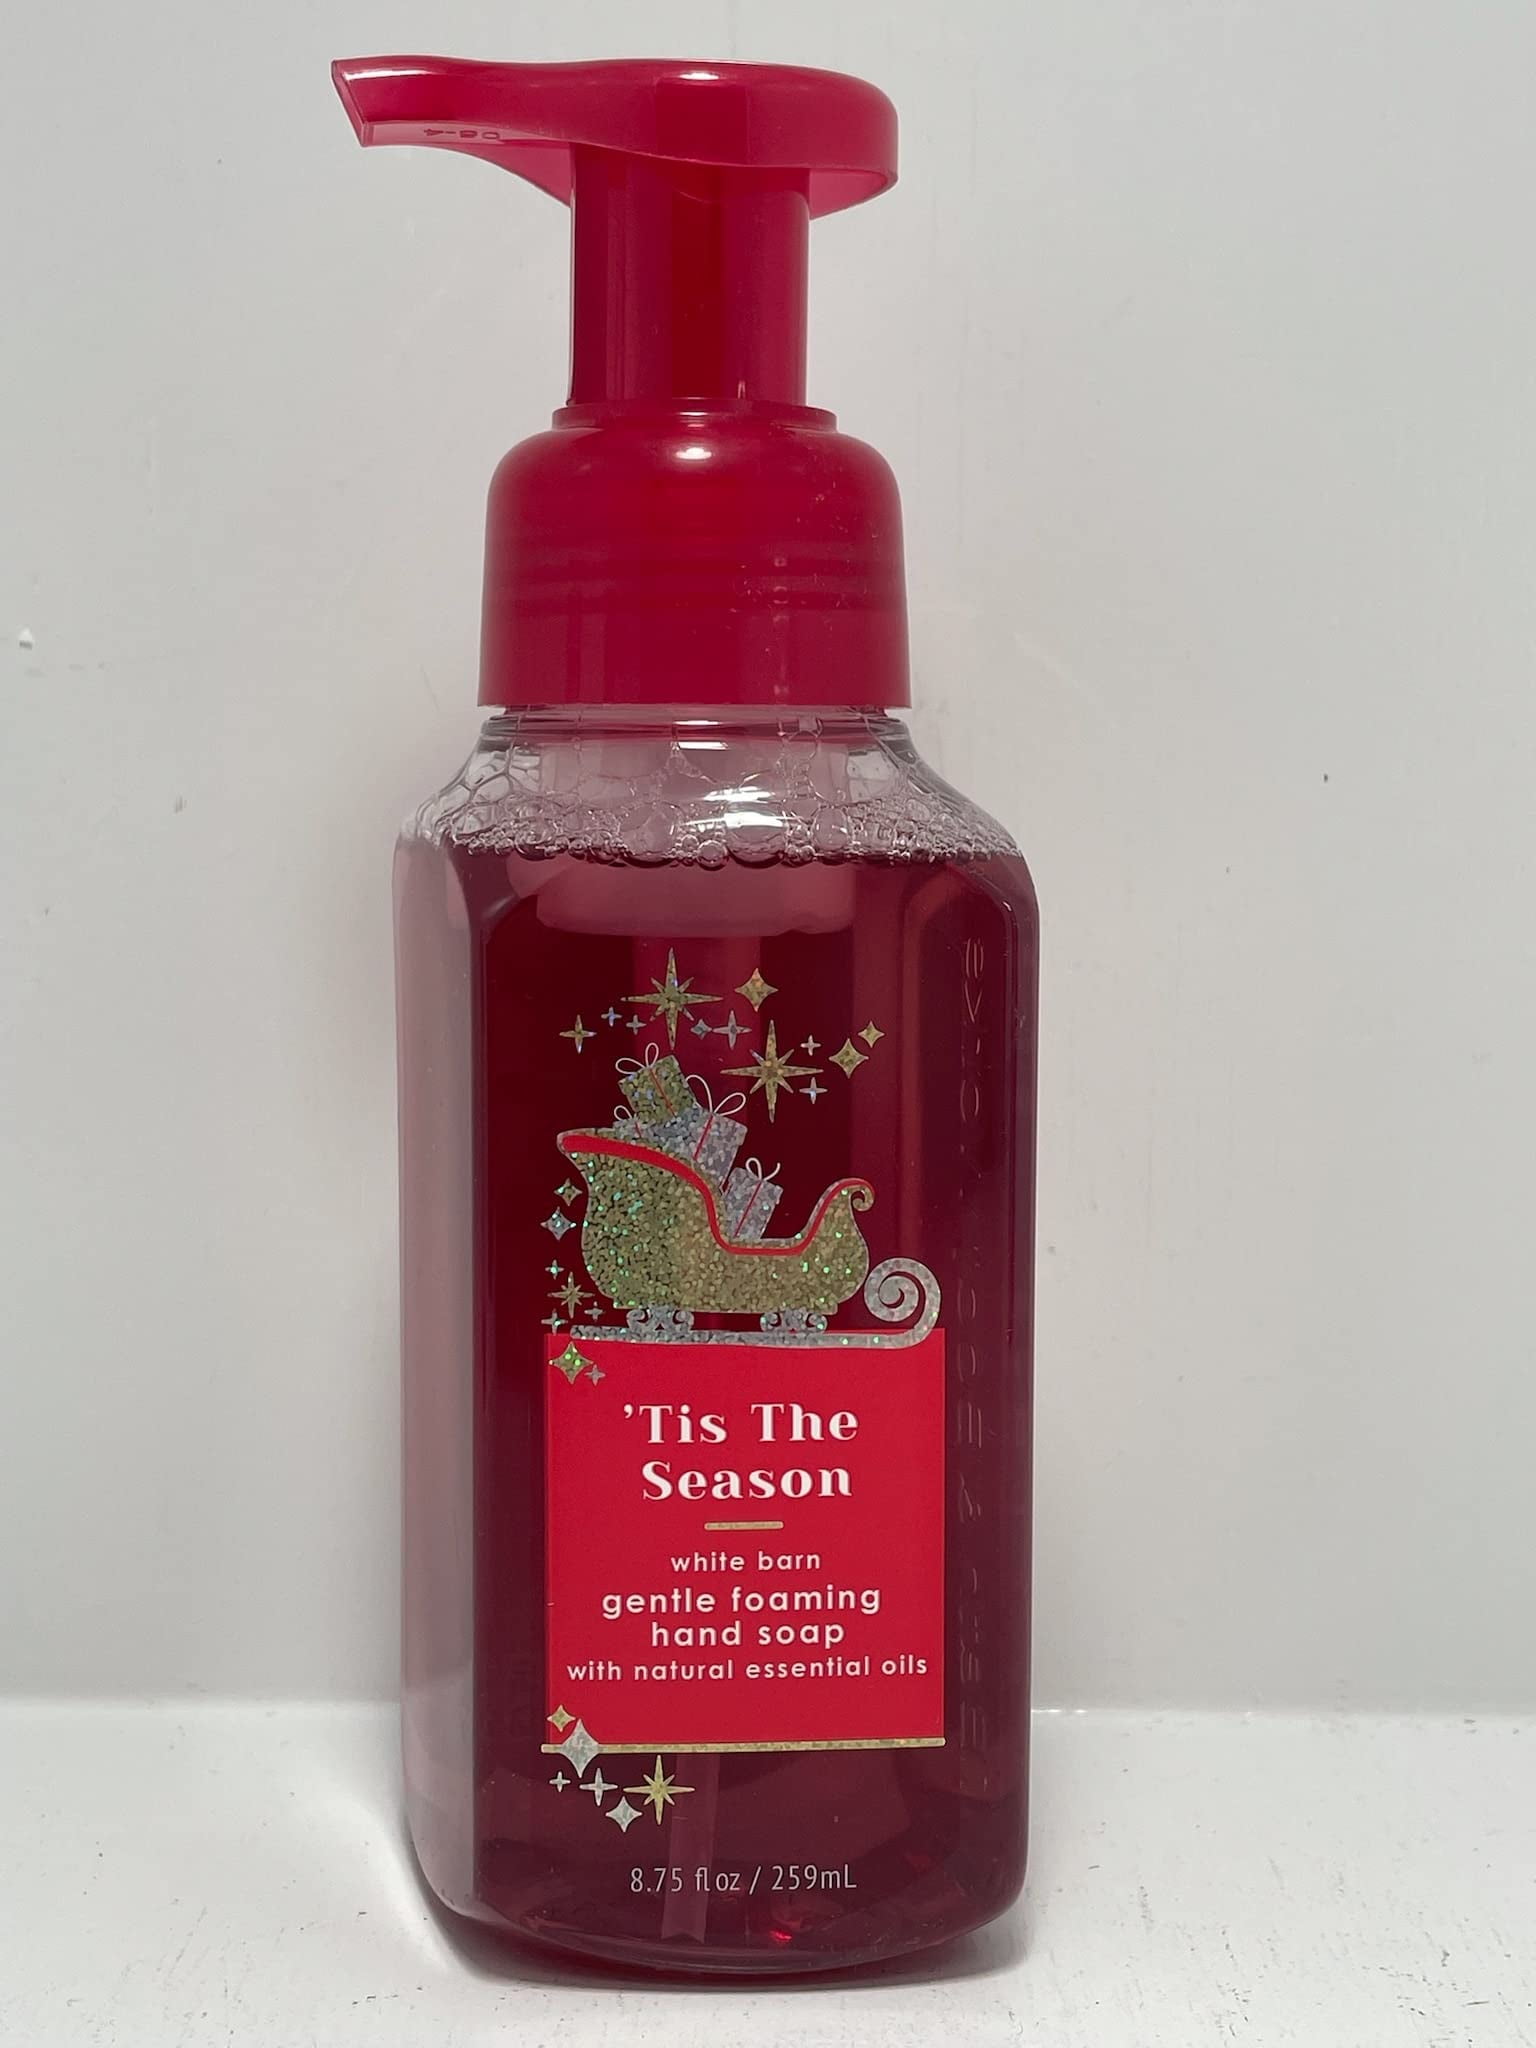 Bath and Body Works Tis The Season Gentle Foaming Hand Soap with 